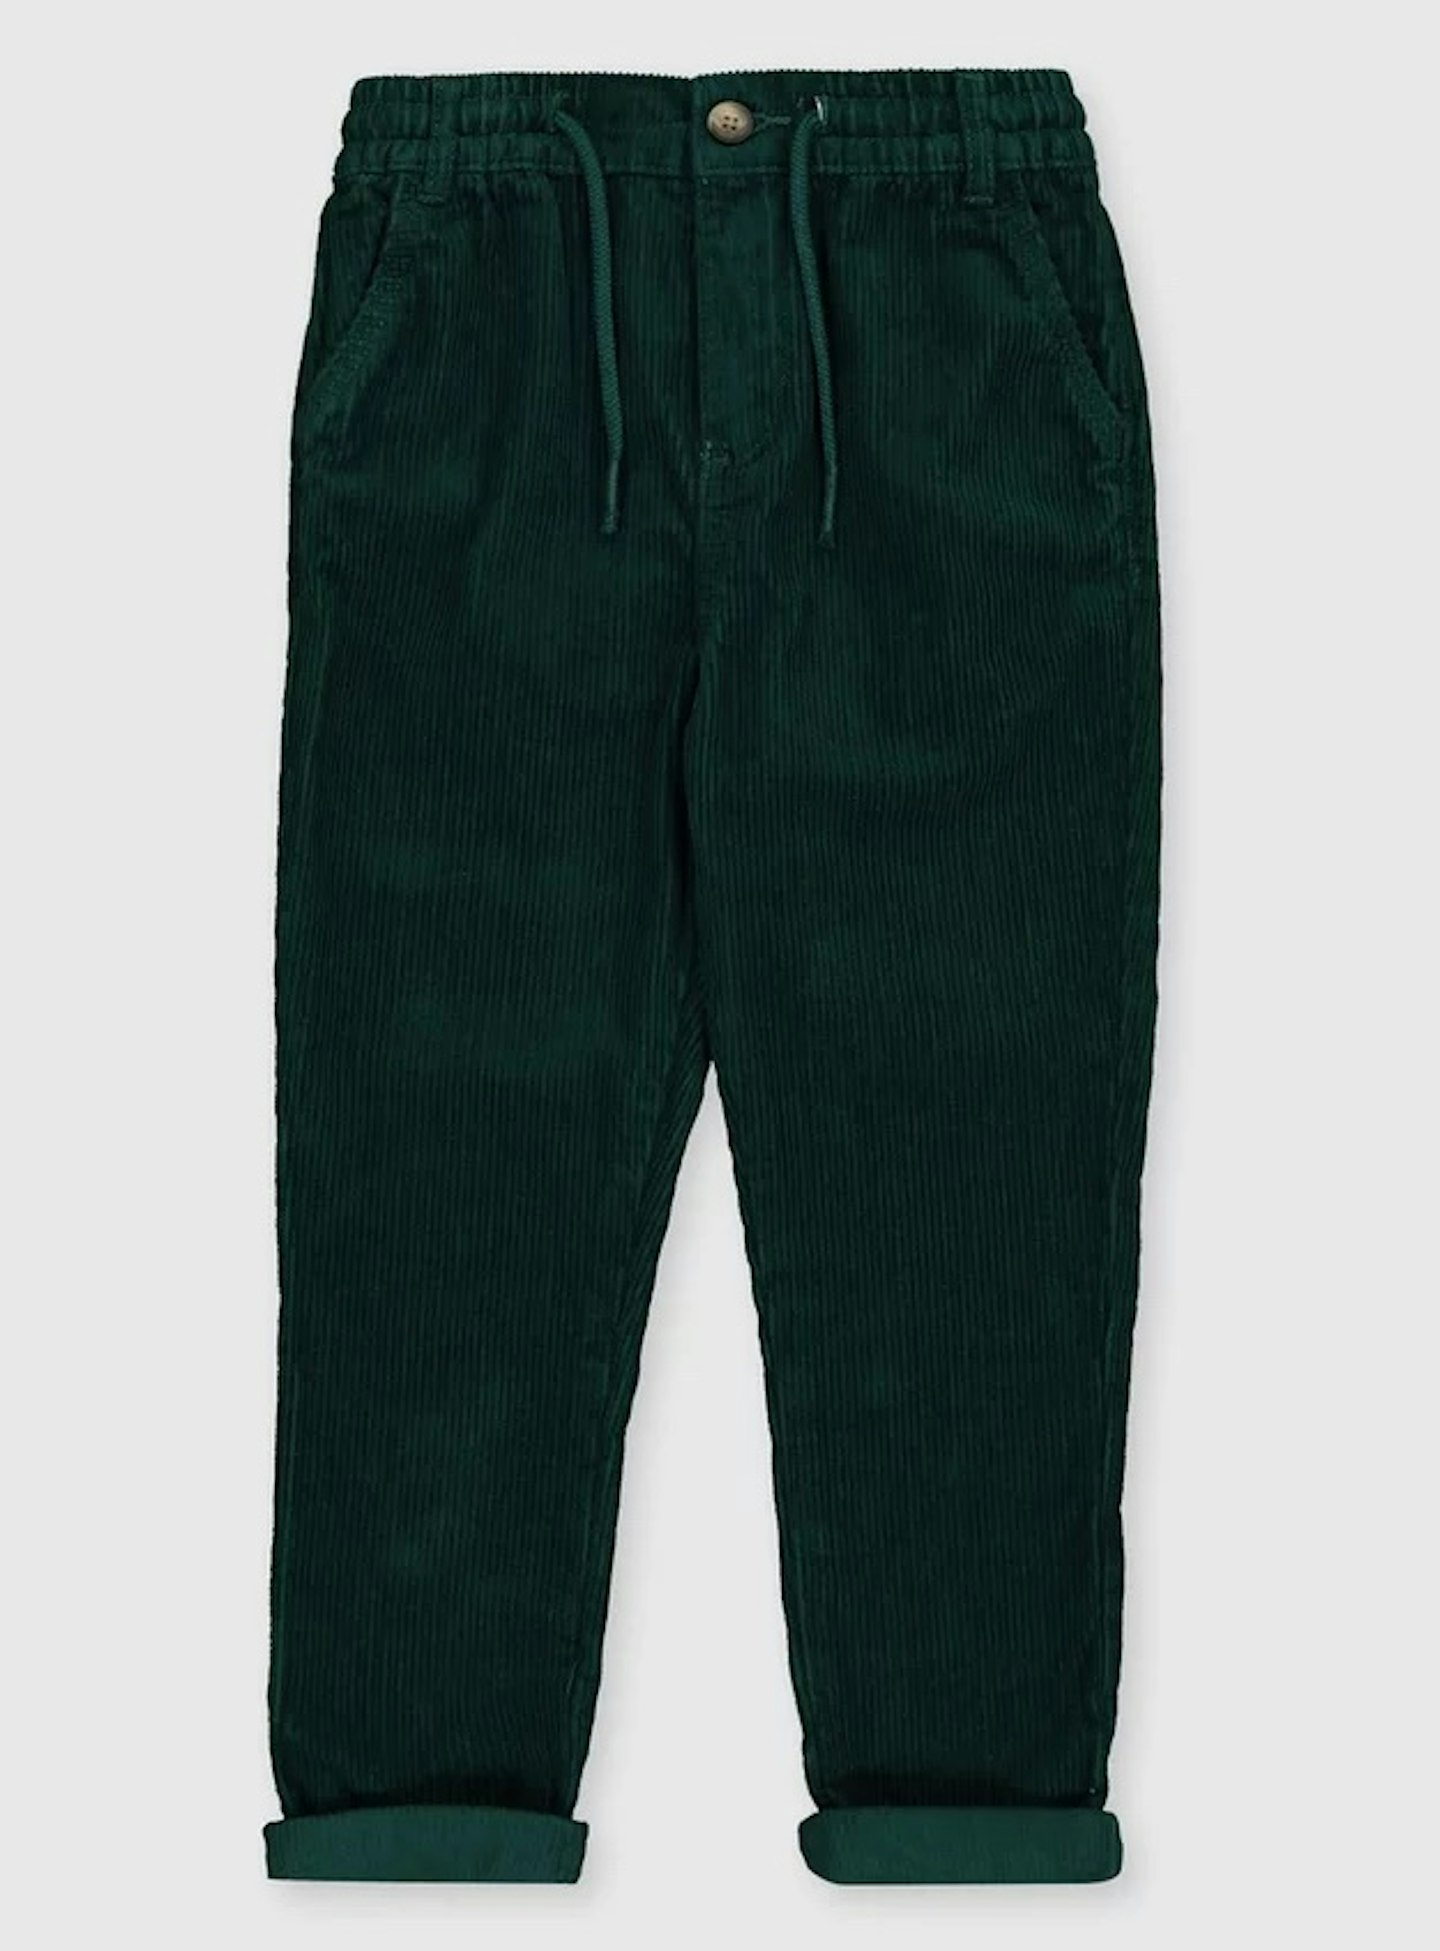 Green Corduroy Joggers (3-13 Years), From £8.50